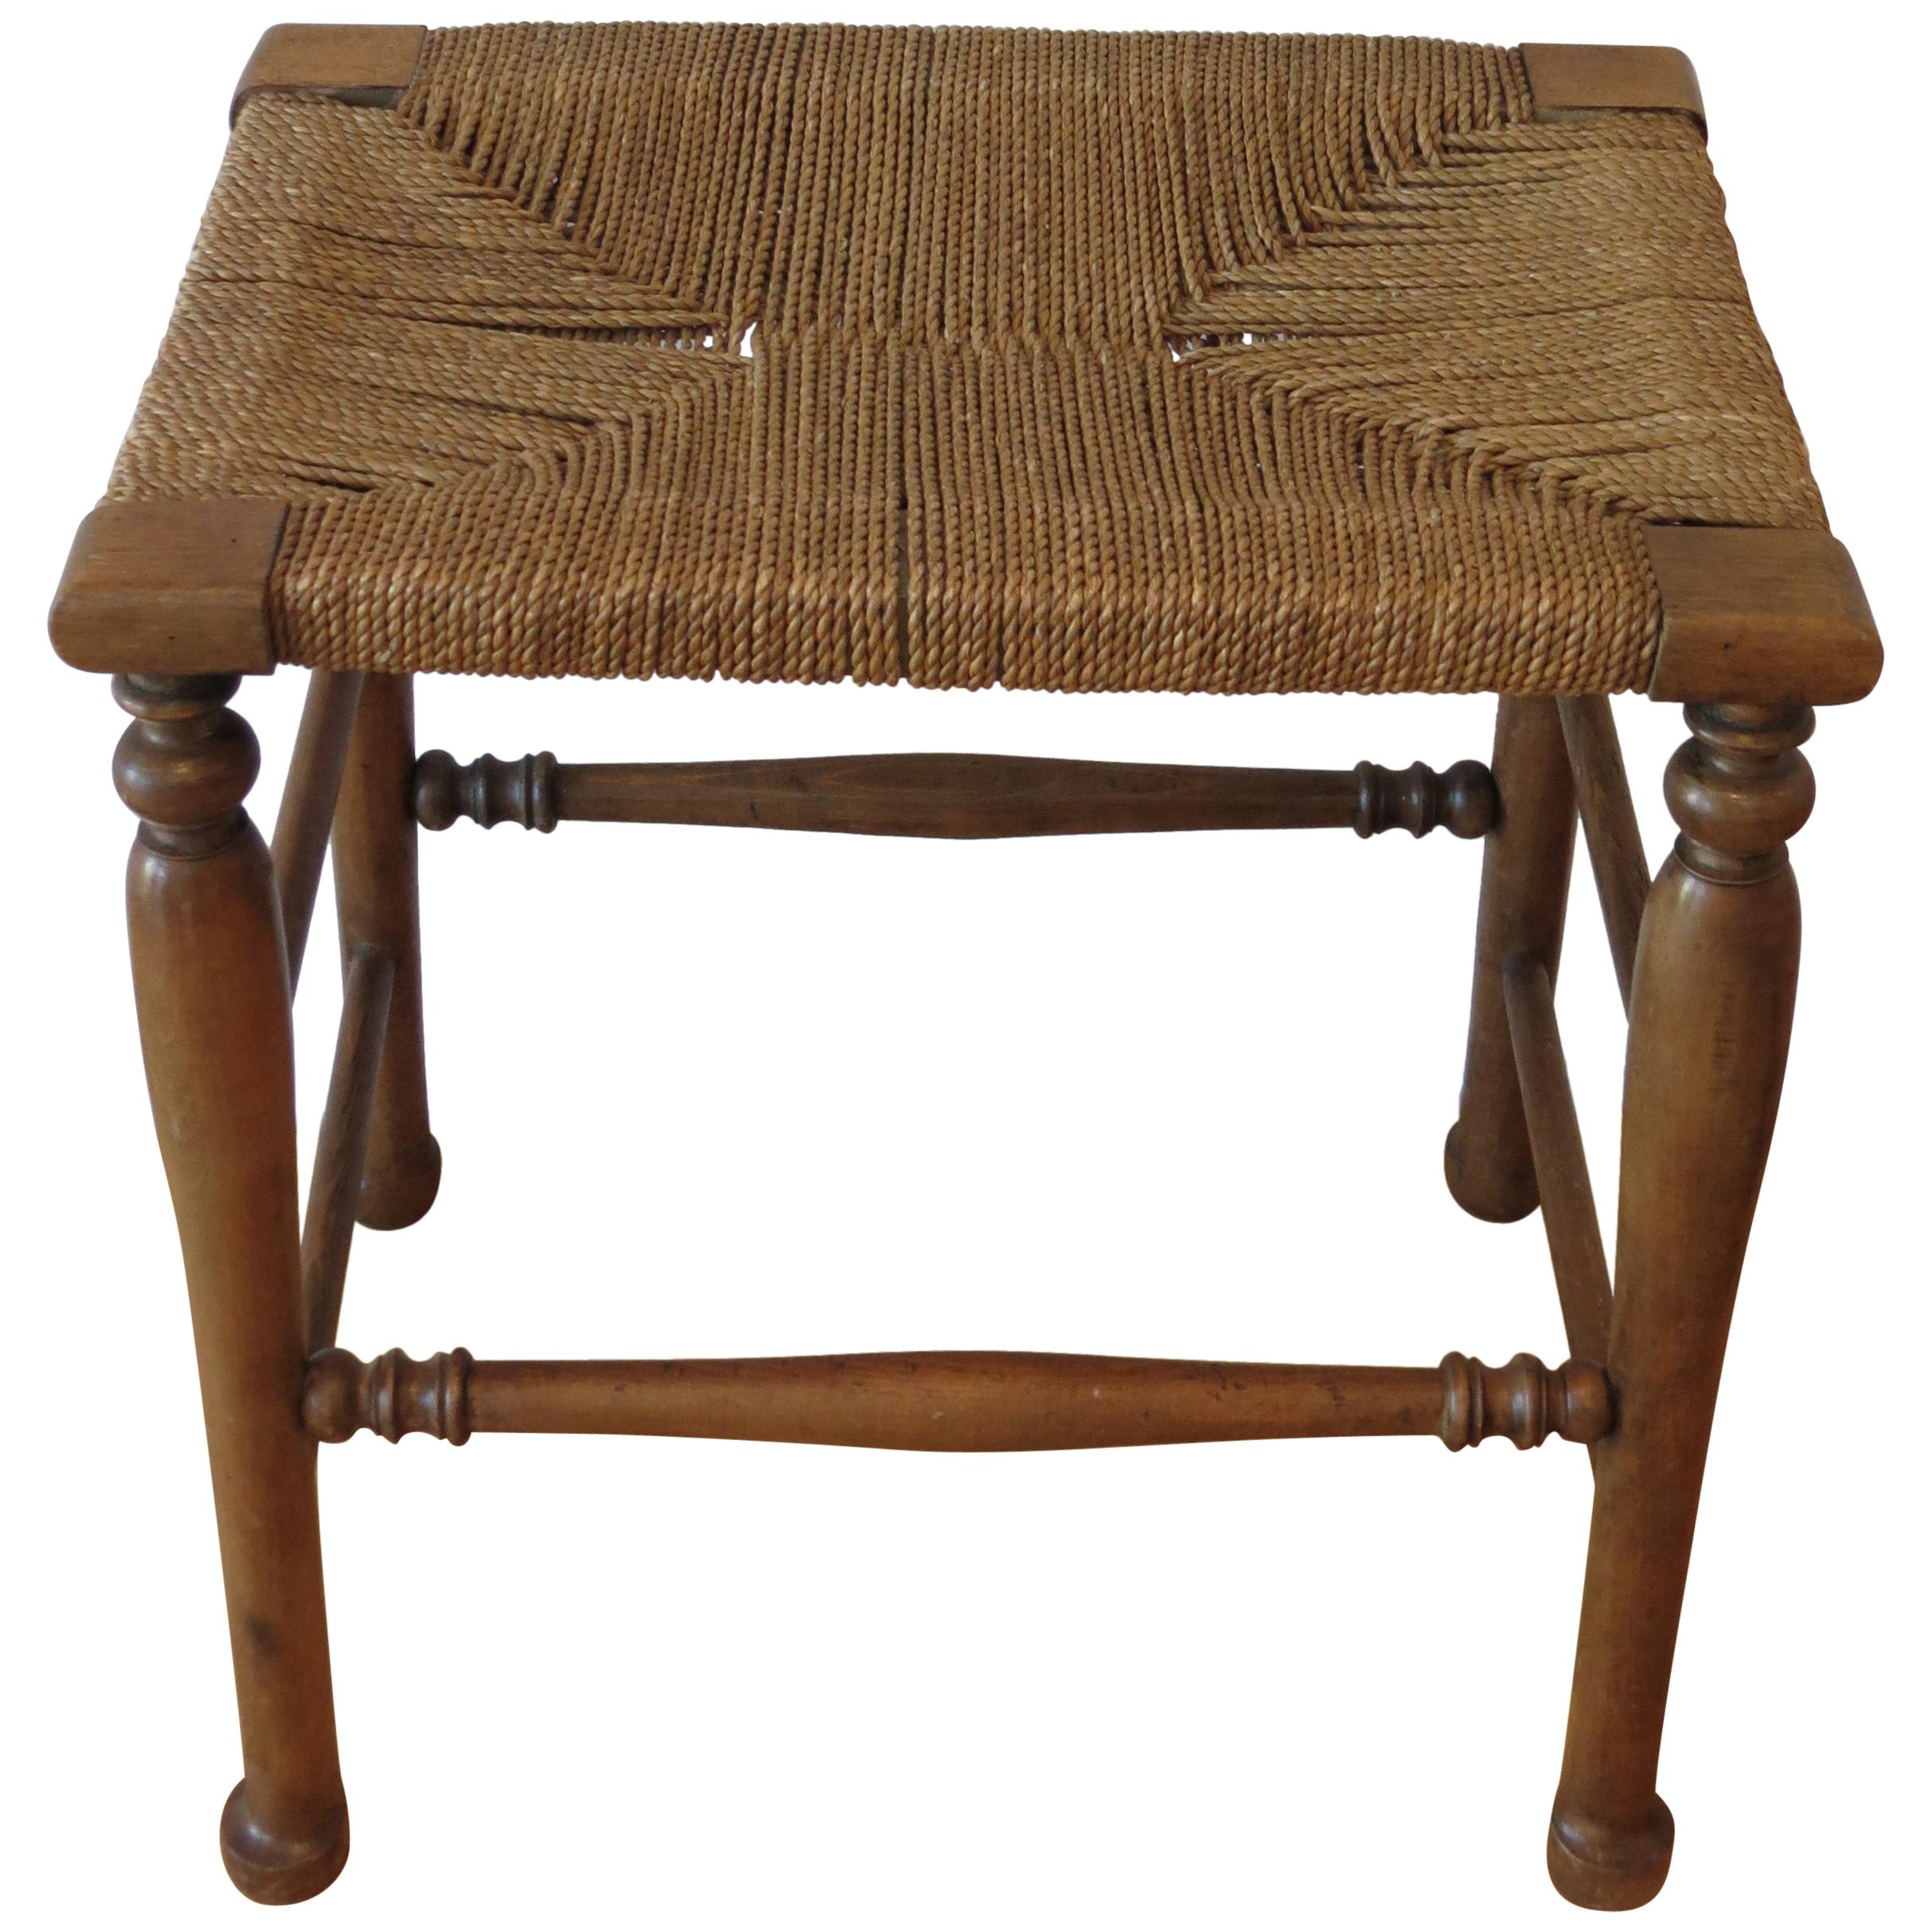 Country Wooden Stool with Woven Seat, 1900s